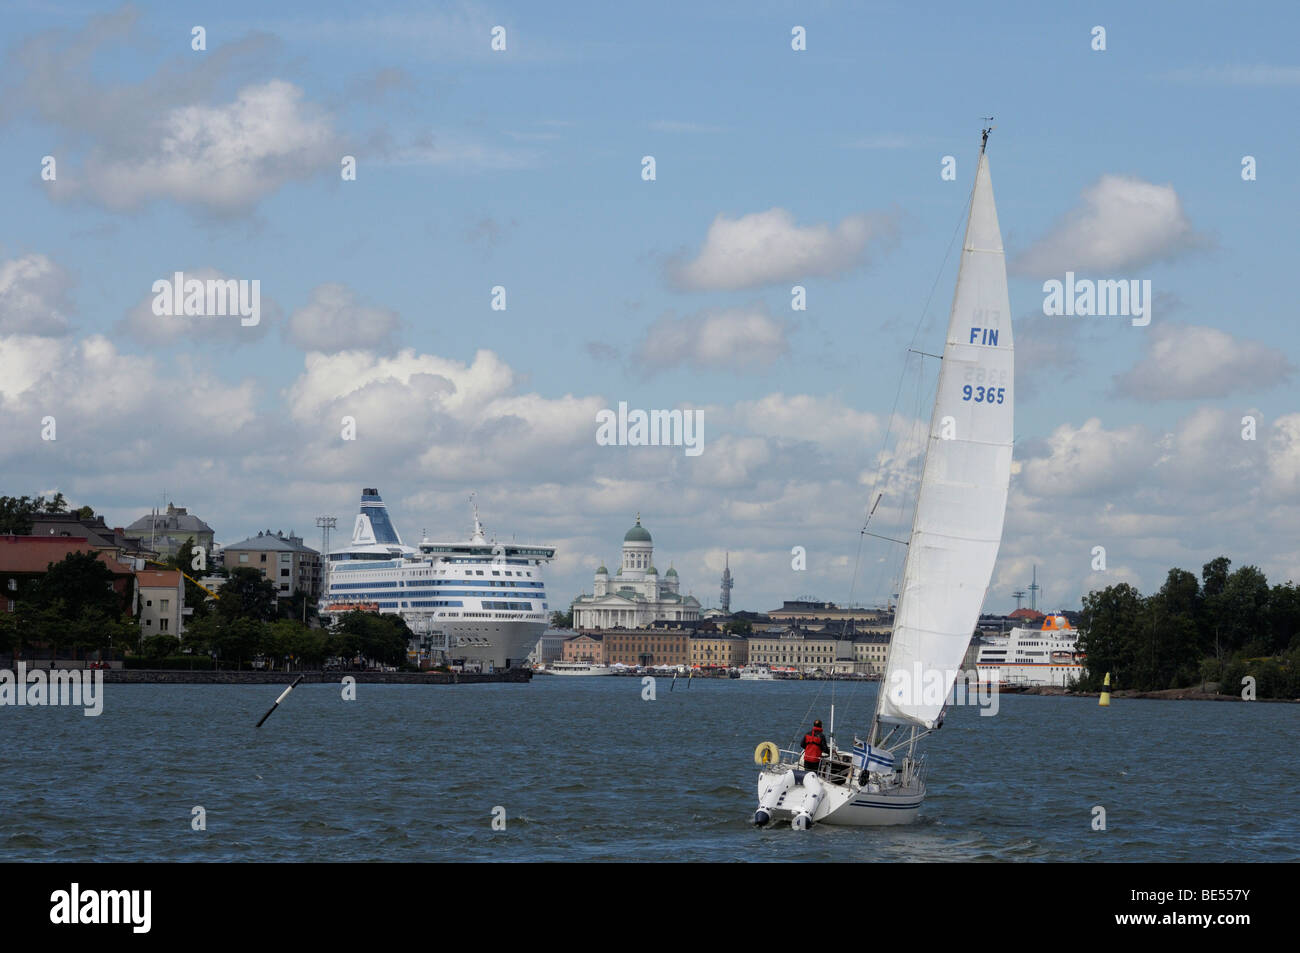 Helsinki, cruise ships in the harbour, Finland, Suomi, Europe Stock Photo